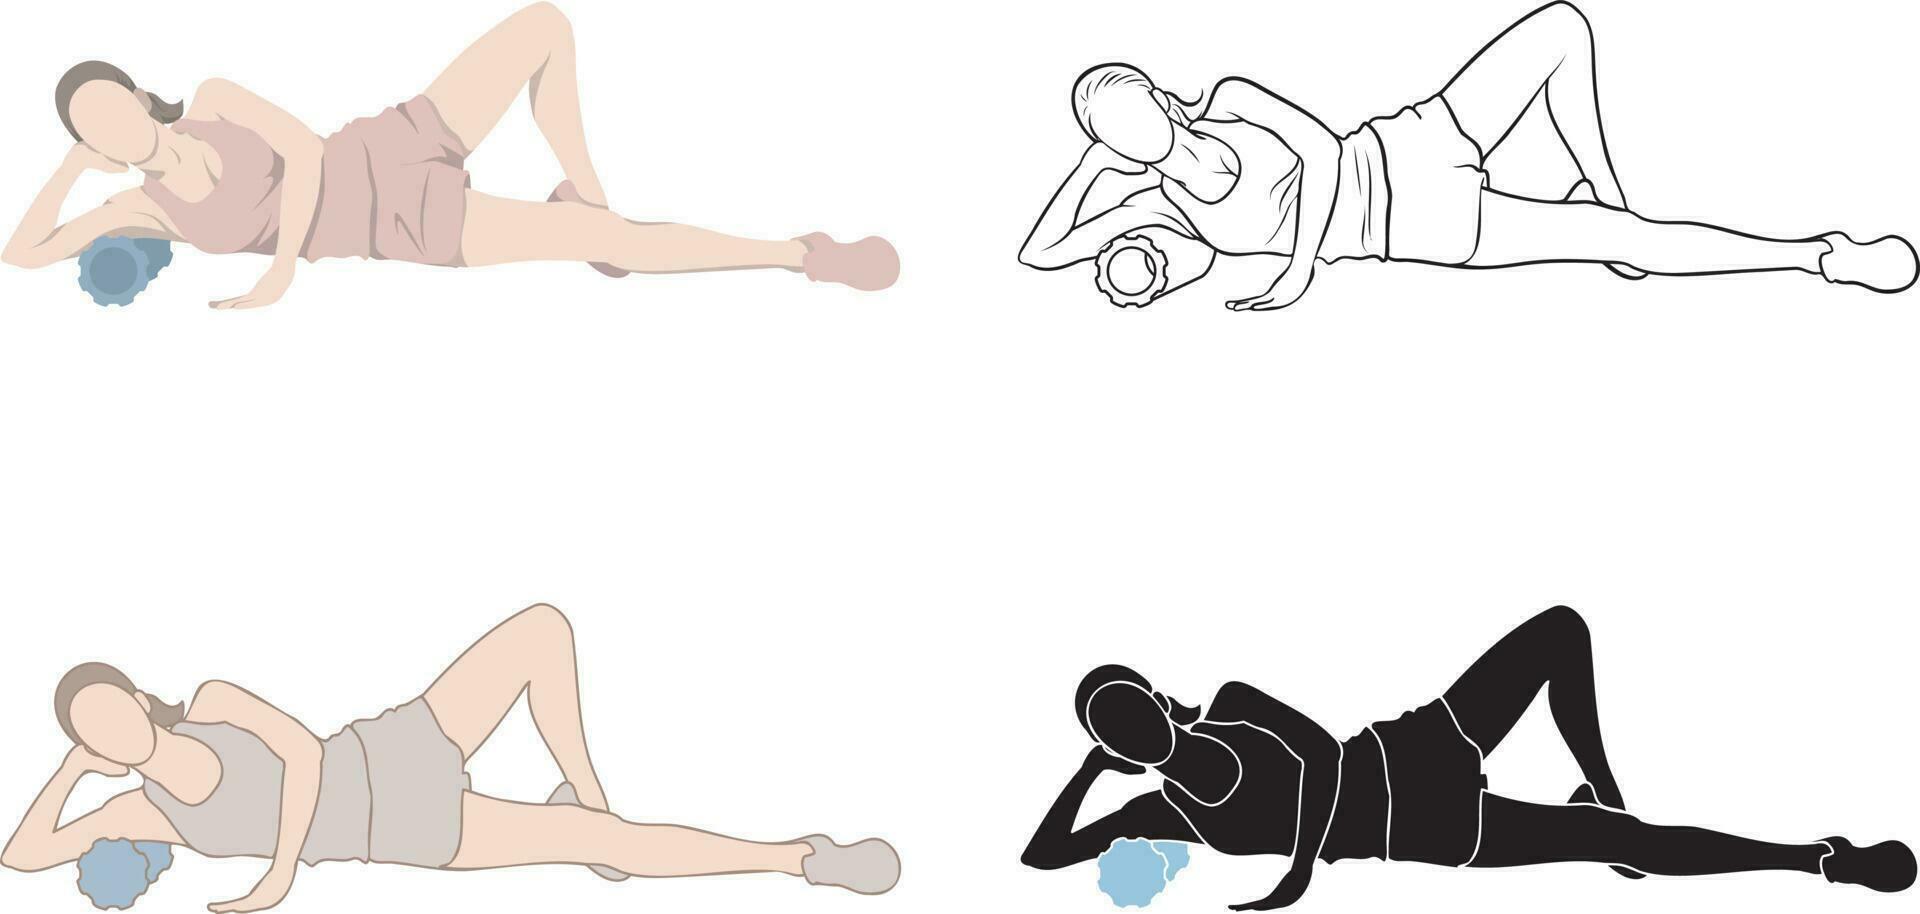 Woman Exercise with Foam Roller Set. vector